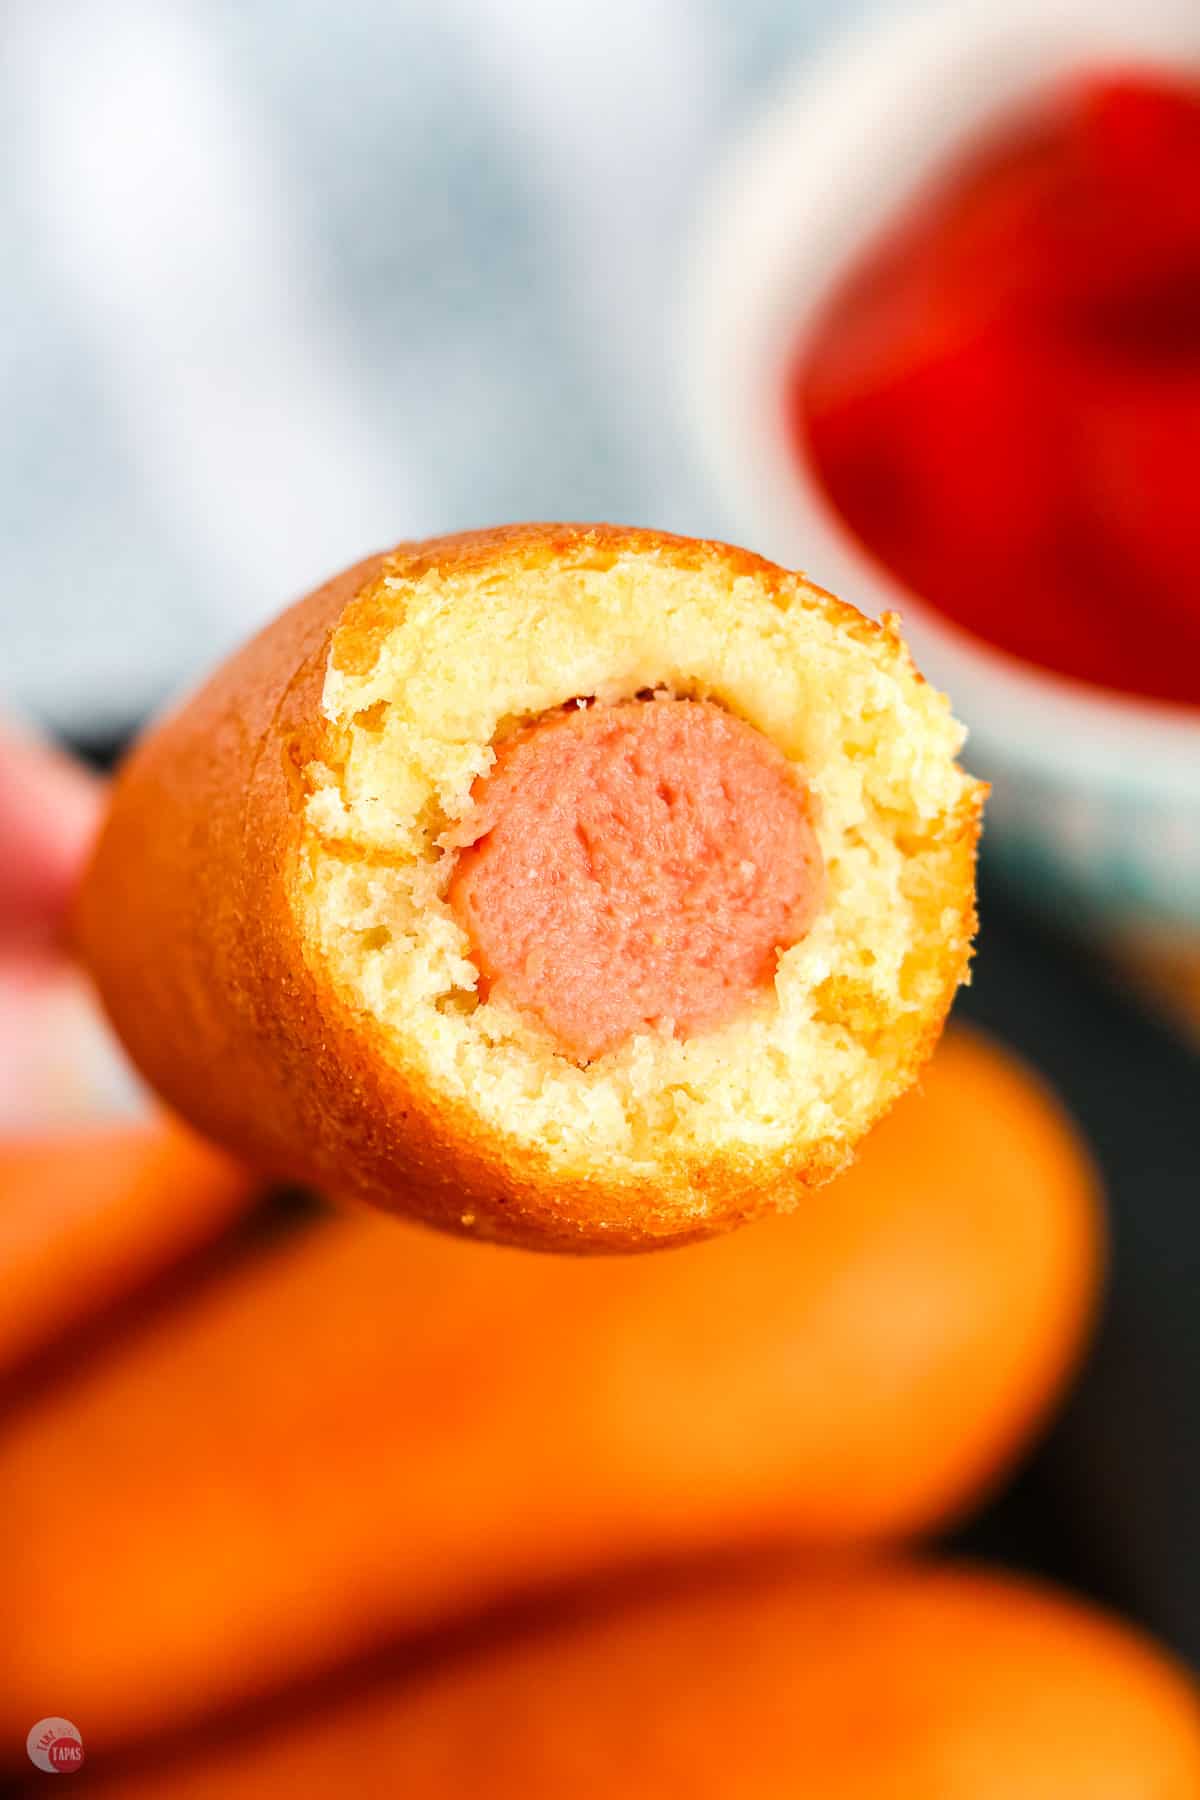 Corn dog with a bite taken off the end being held in mid-air.